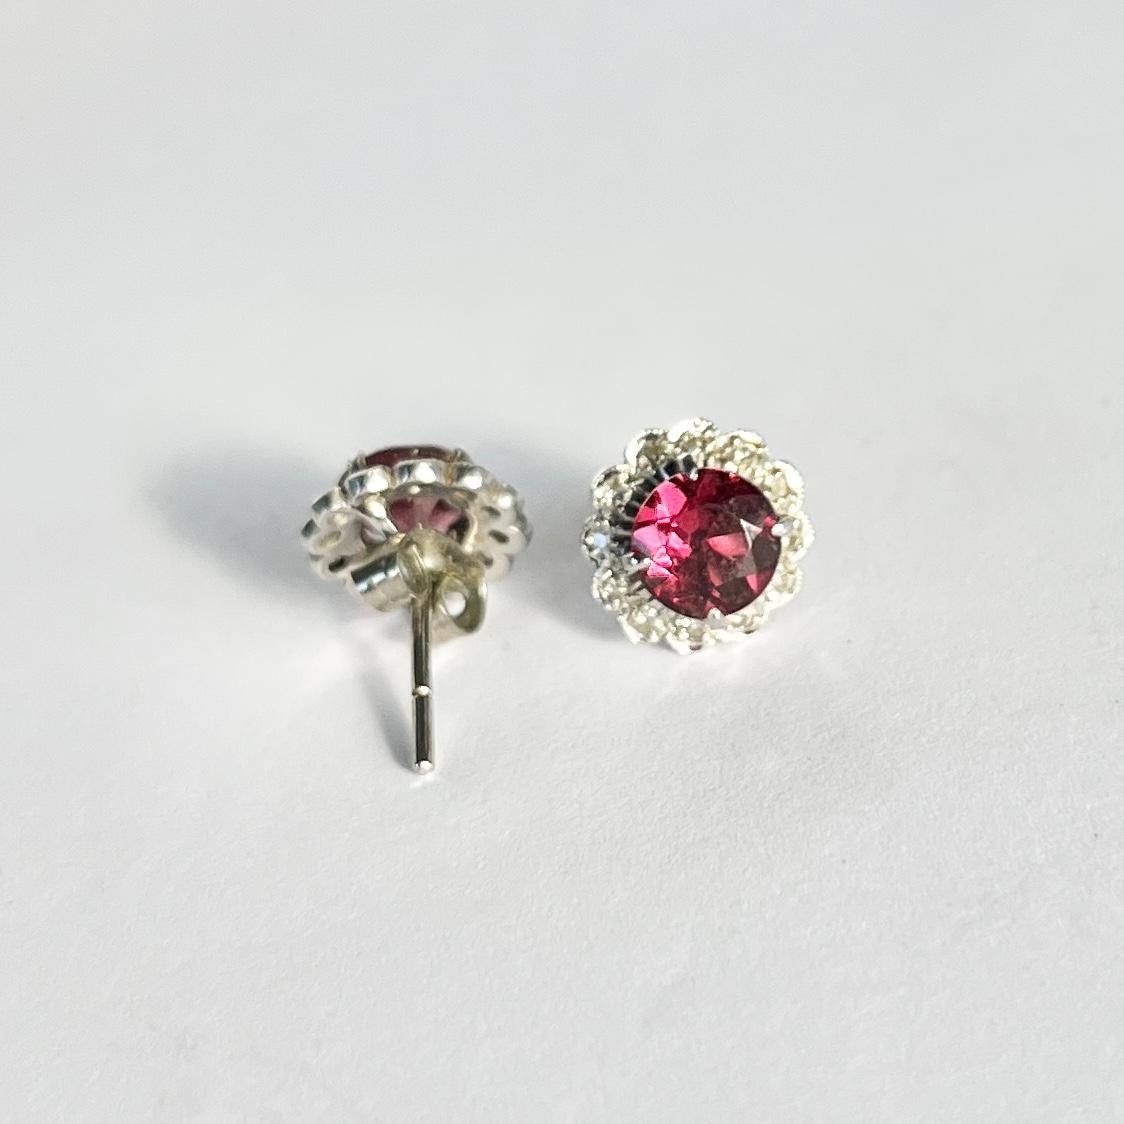 The 1ct garnets at the centre of these clusters are a beautiful deep, rich pink colour and are surrounded by a halo of glistening diamonds. The diamonds total approximately 11pts per earring. Modelled in 9ct white gold.

Cluster Diameter: 10.5mm